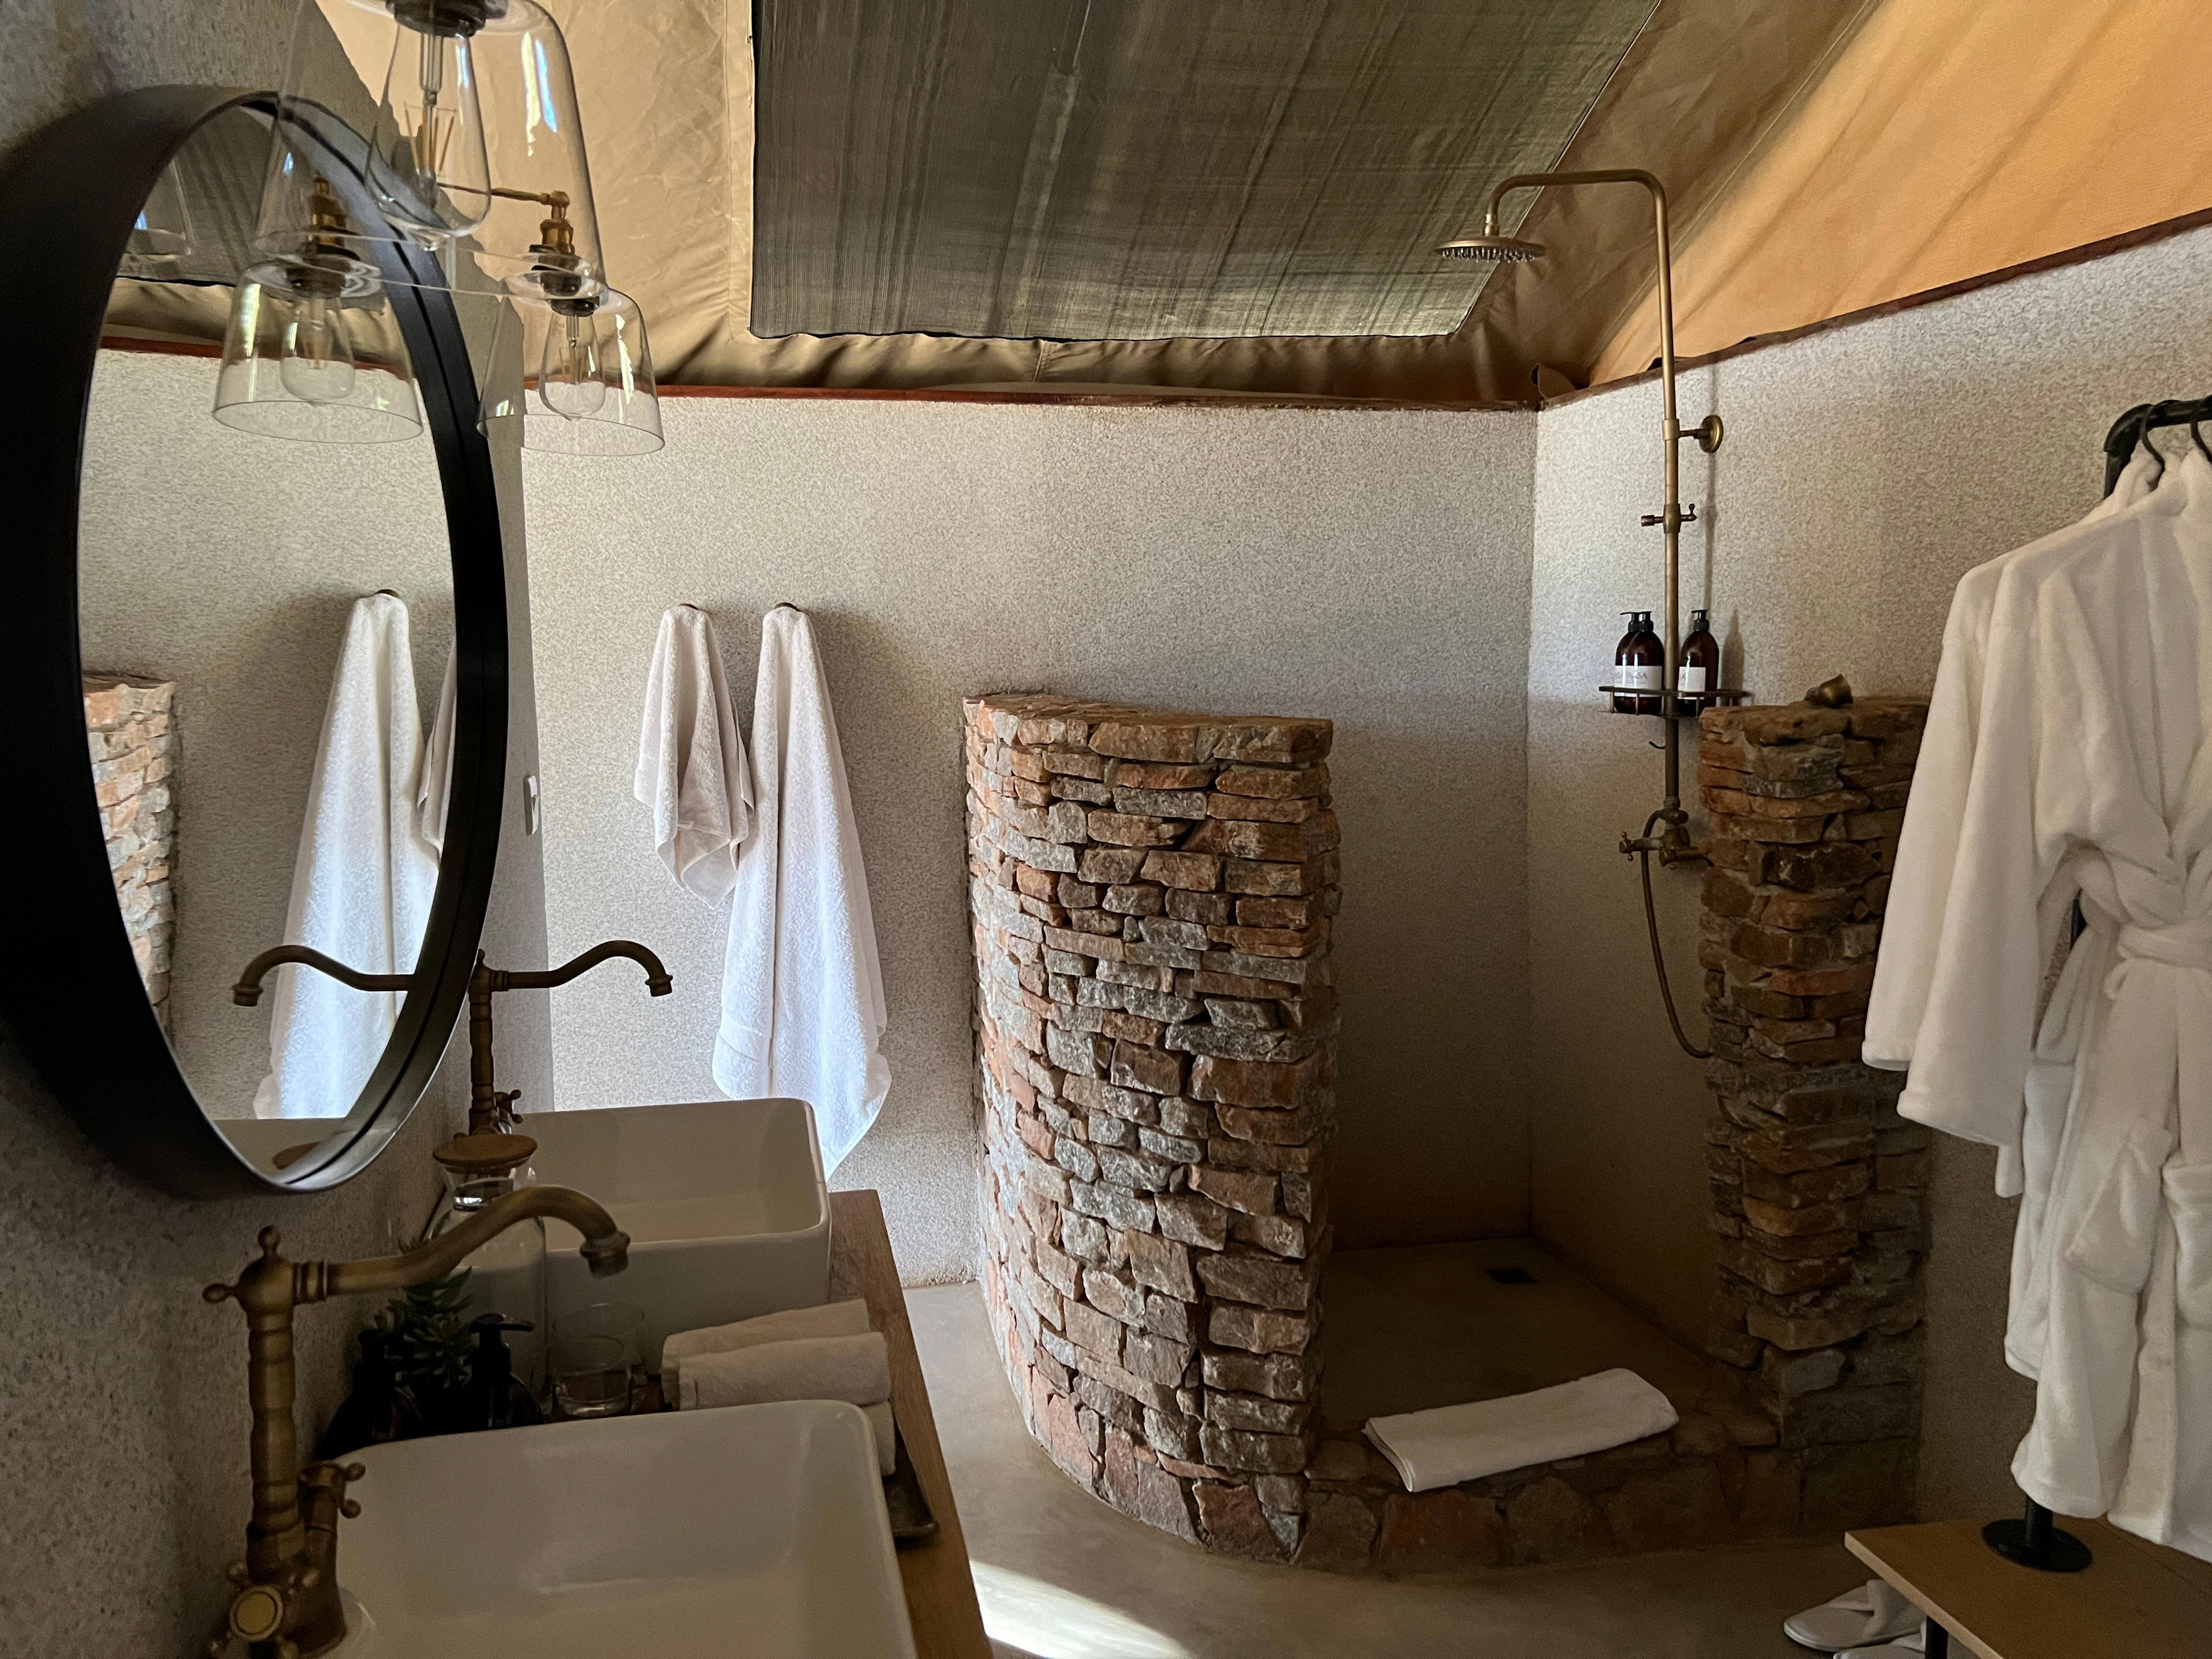 <p>The shower's hot water was great and we had double sinks we could get ready at.</p><p>Another perk of the lodge is that we could have staff do our laundry every day, which meant we could pack less clothing.</p>